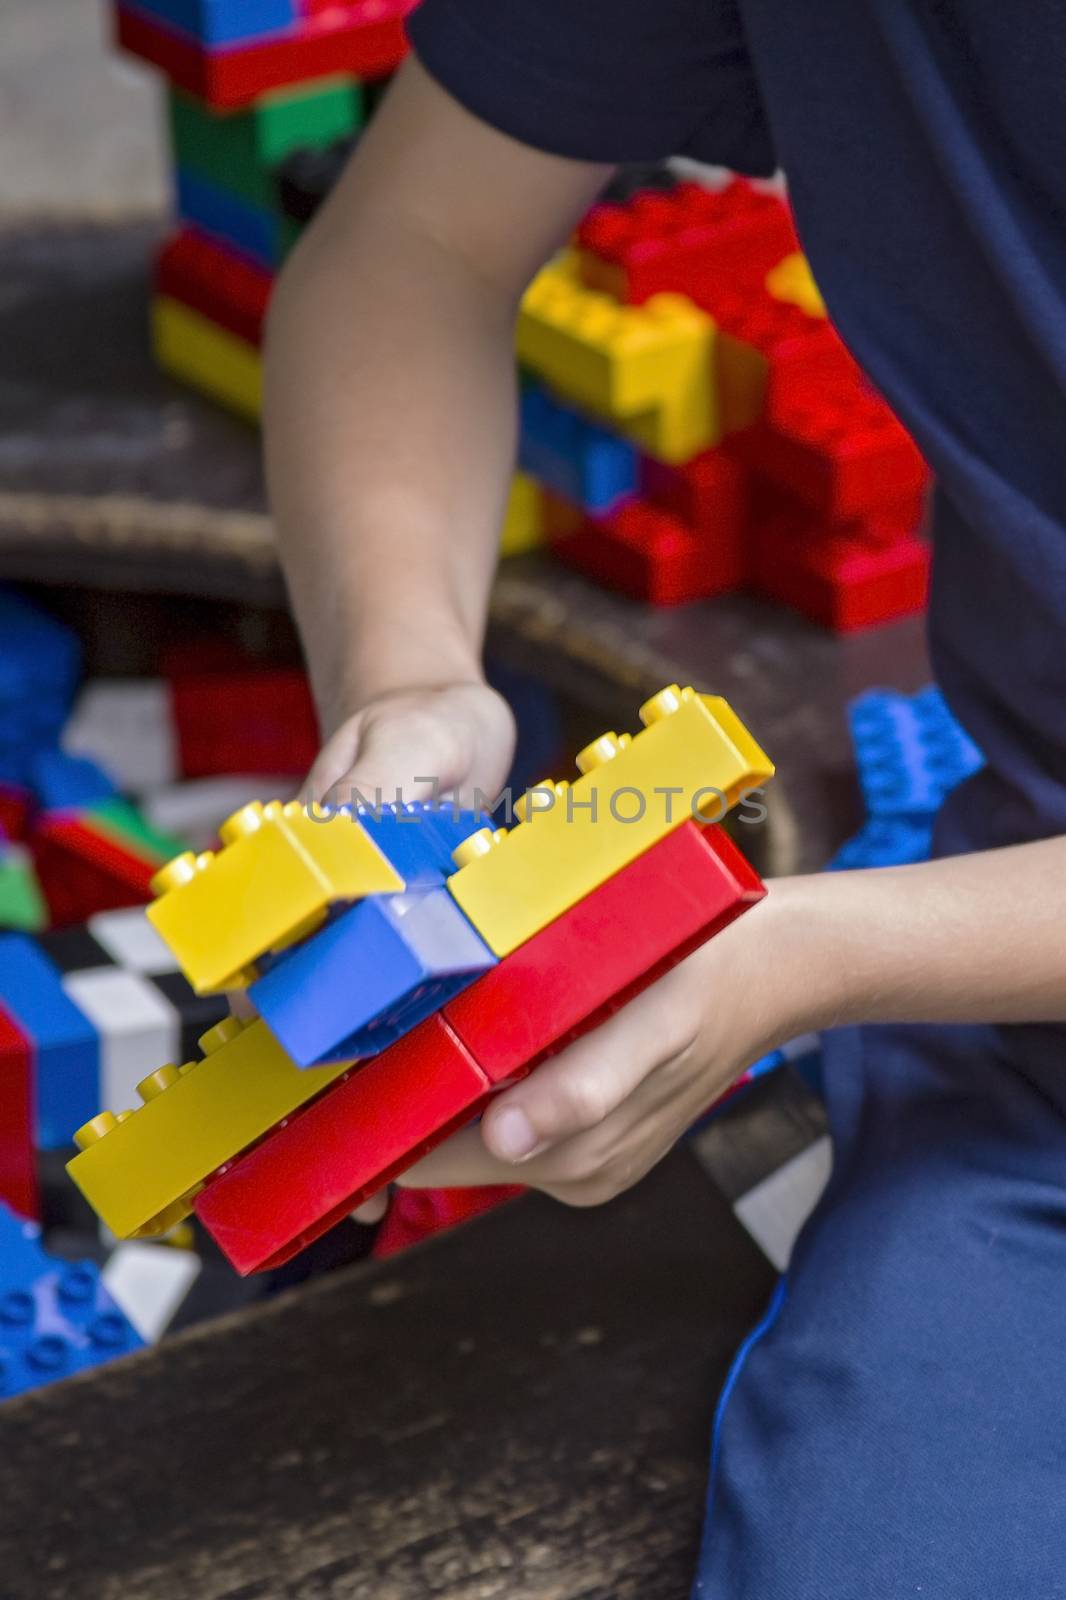 Closeup of child's hands with colorful plastic bricks and details of toys. Boy playing with parts of bright small spare parts of lego.